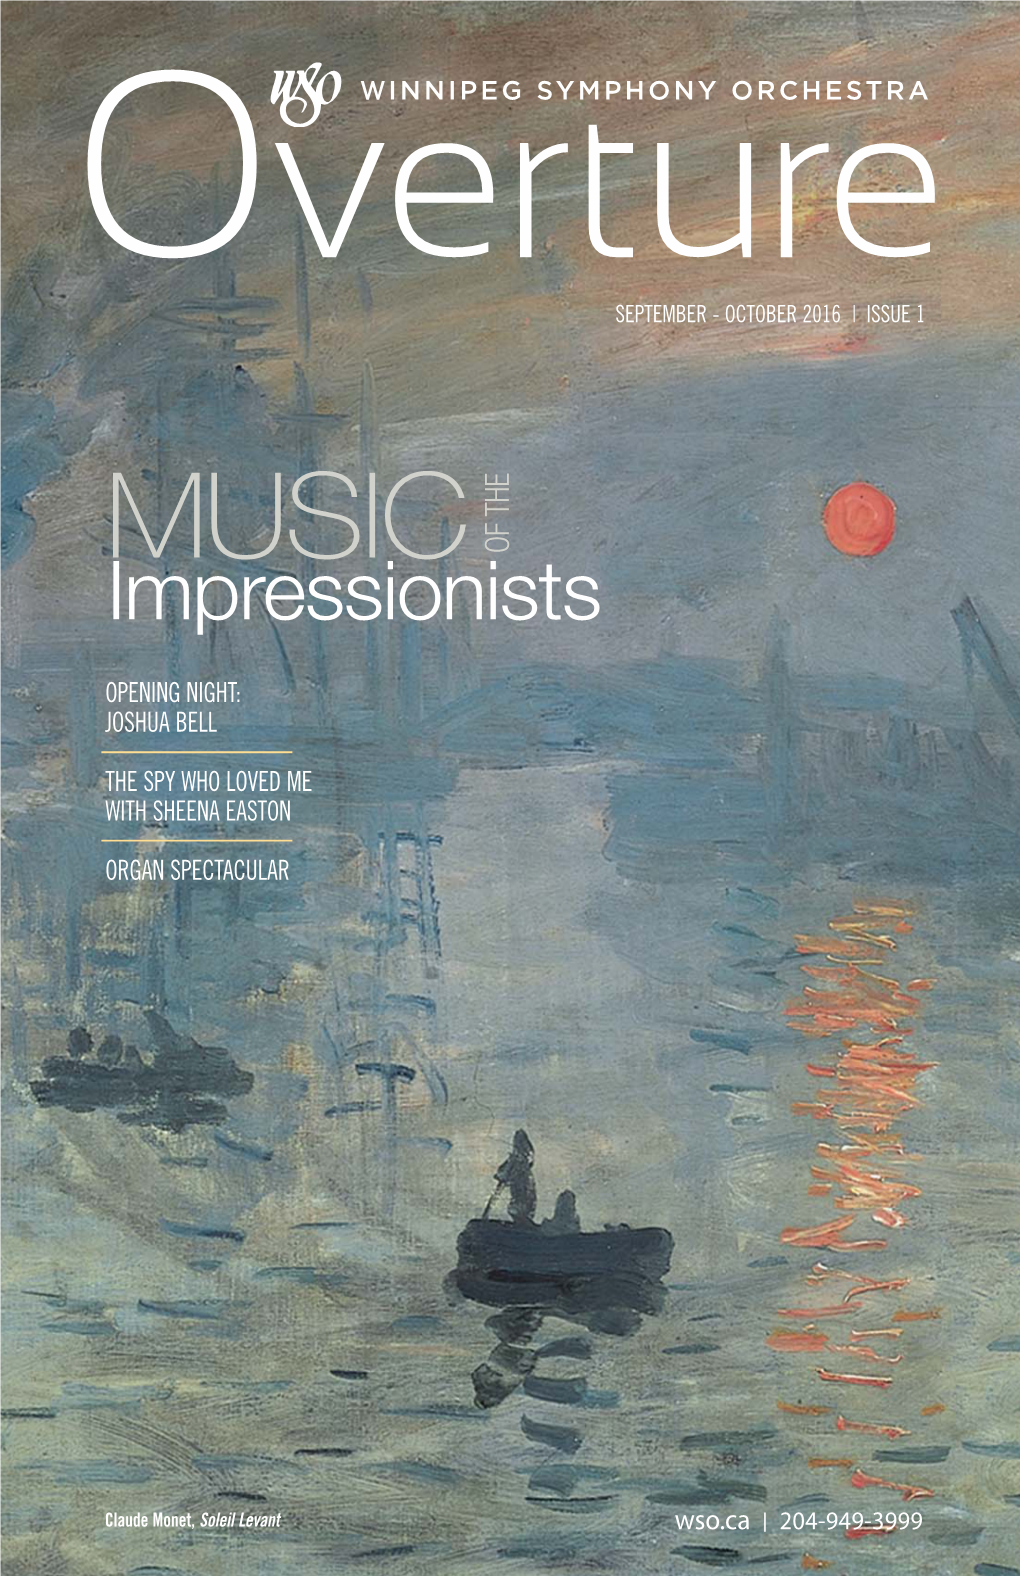 MUSIC of the Impressionists